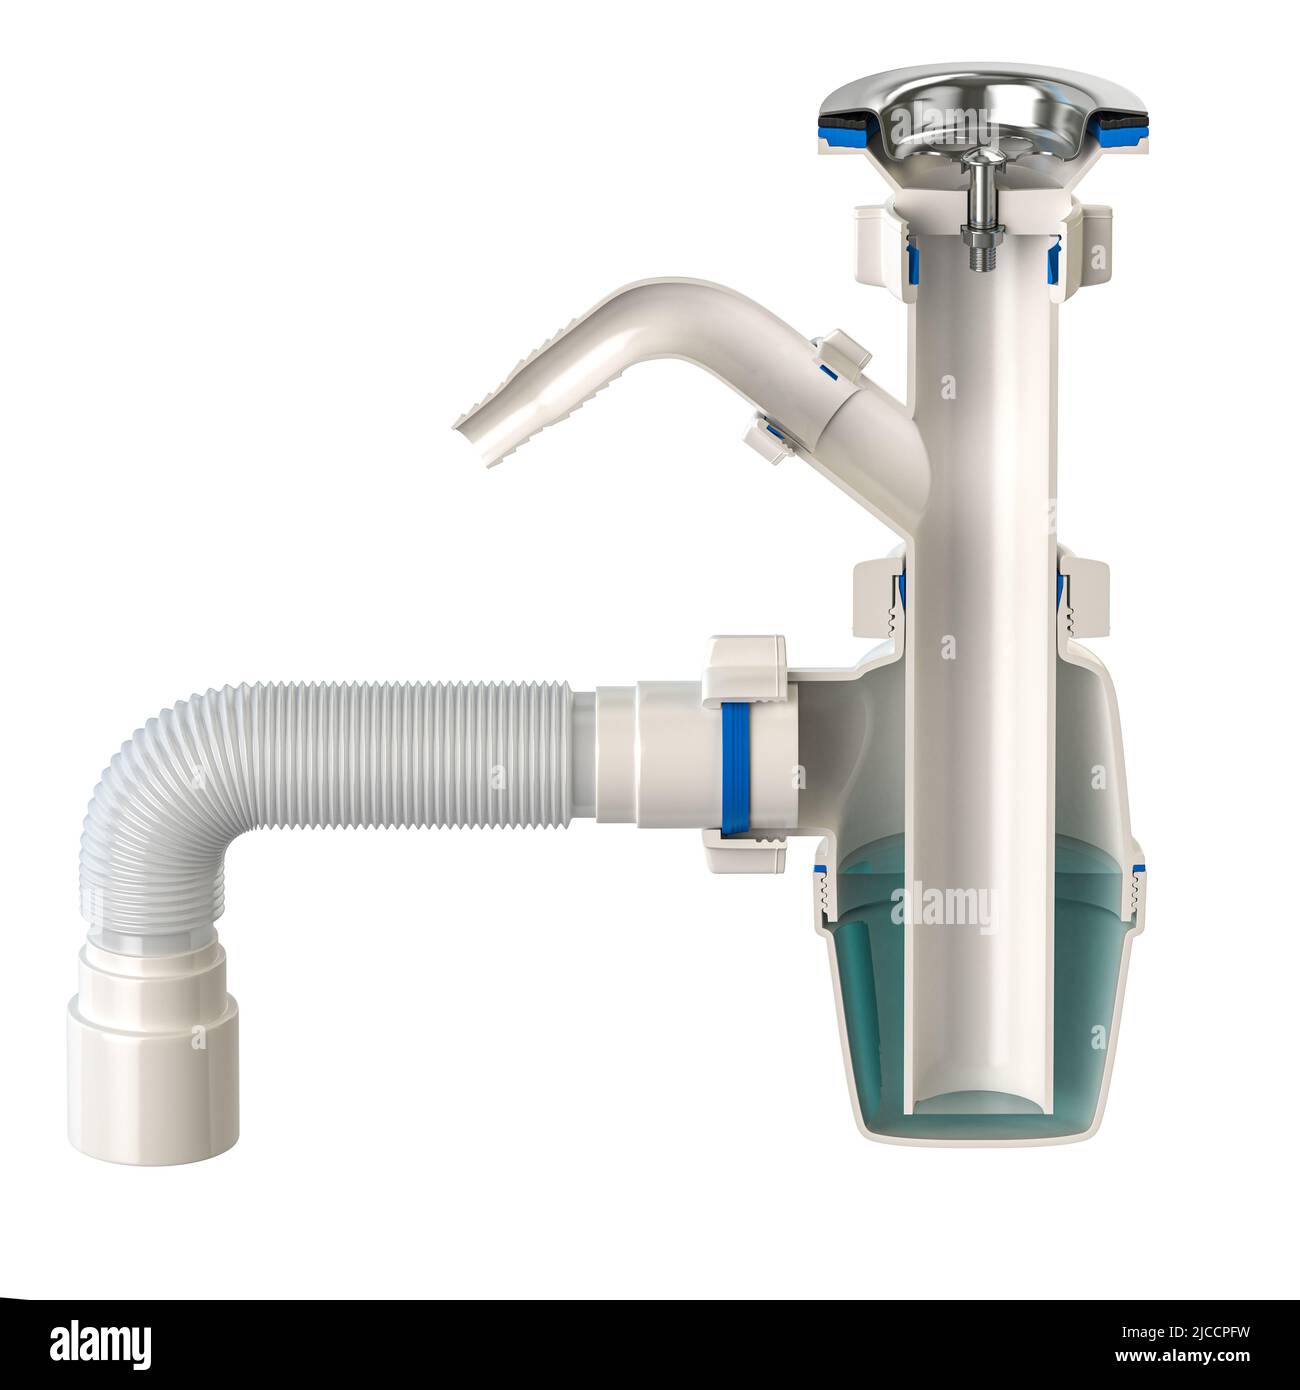 Cross section of siphon with bottle trap and pvc plastic pipes for sinks isolated on white. 3d illustration Stock Photo